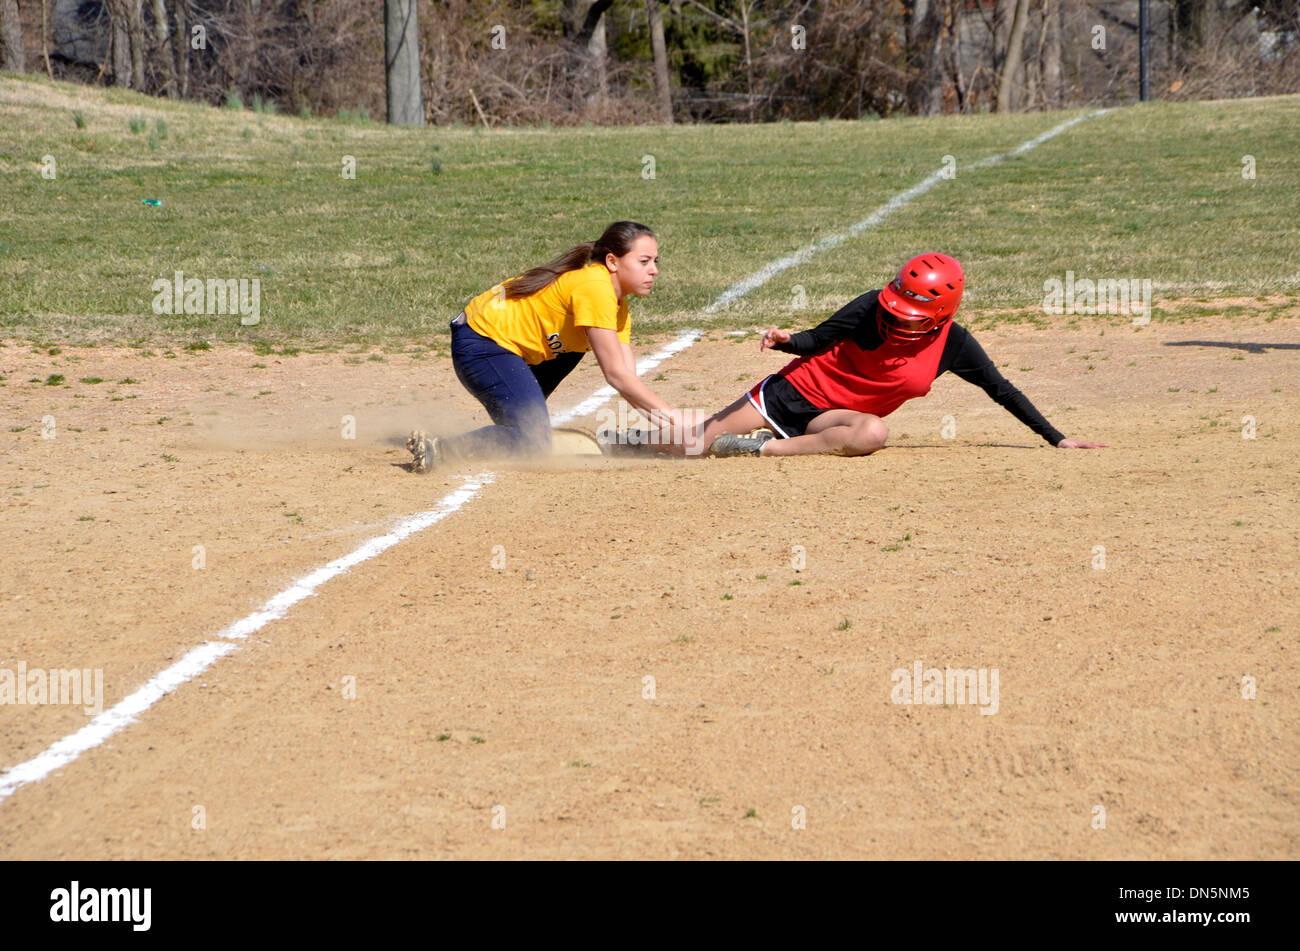 Play at third base in a high school softball game Stock Photo